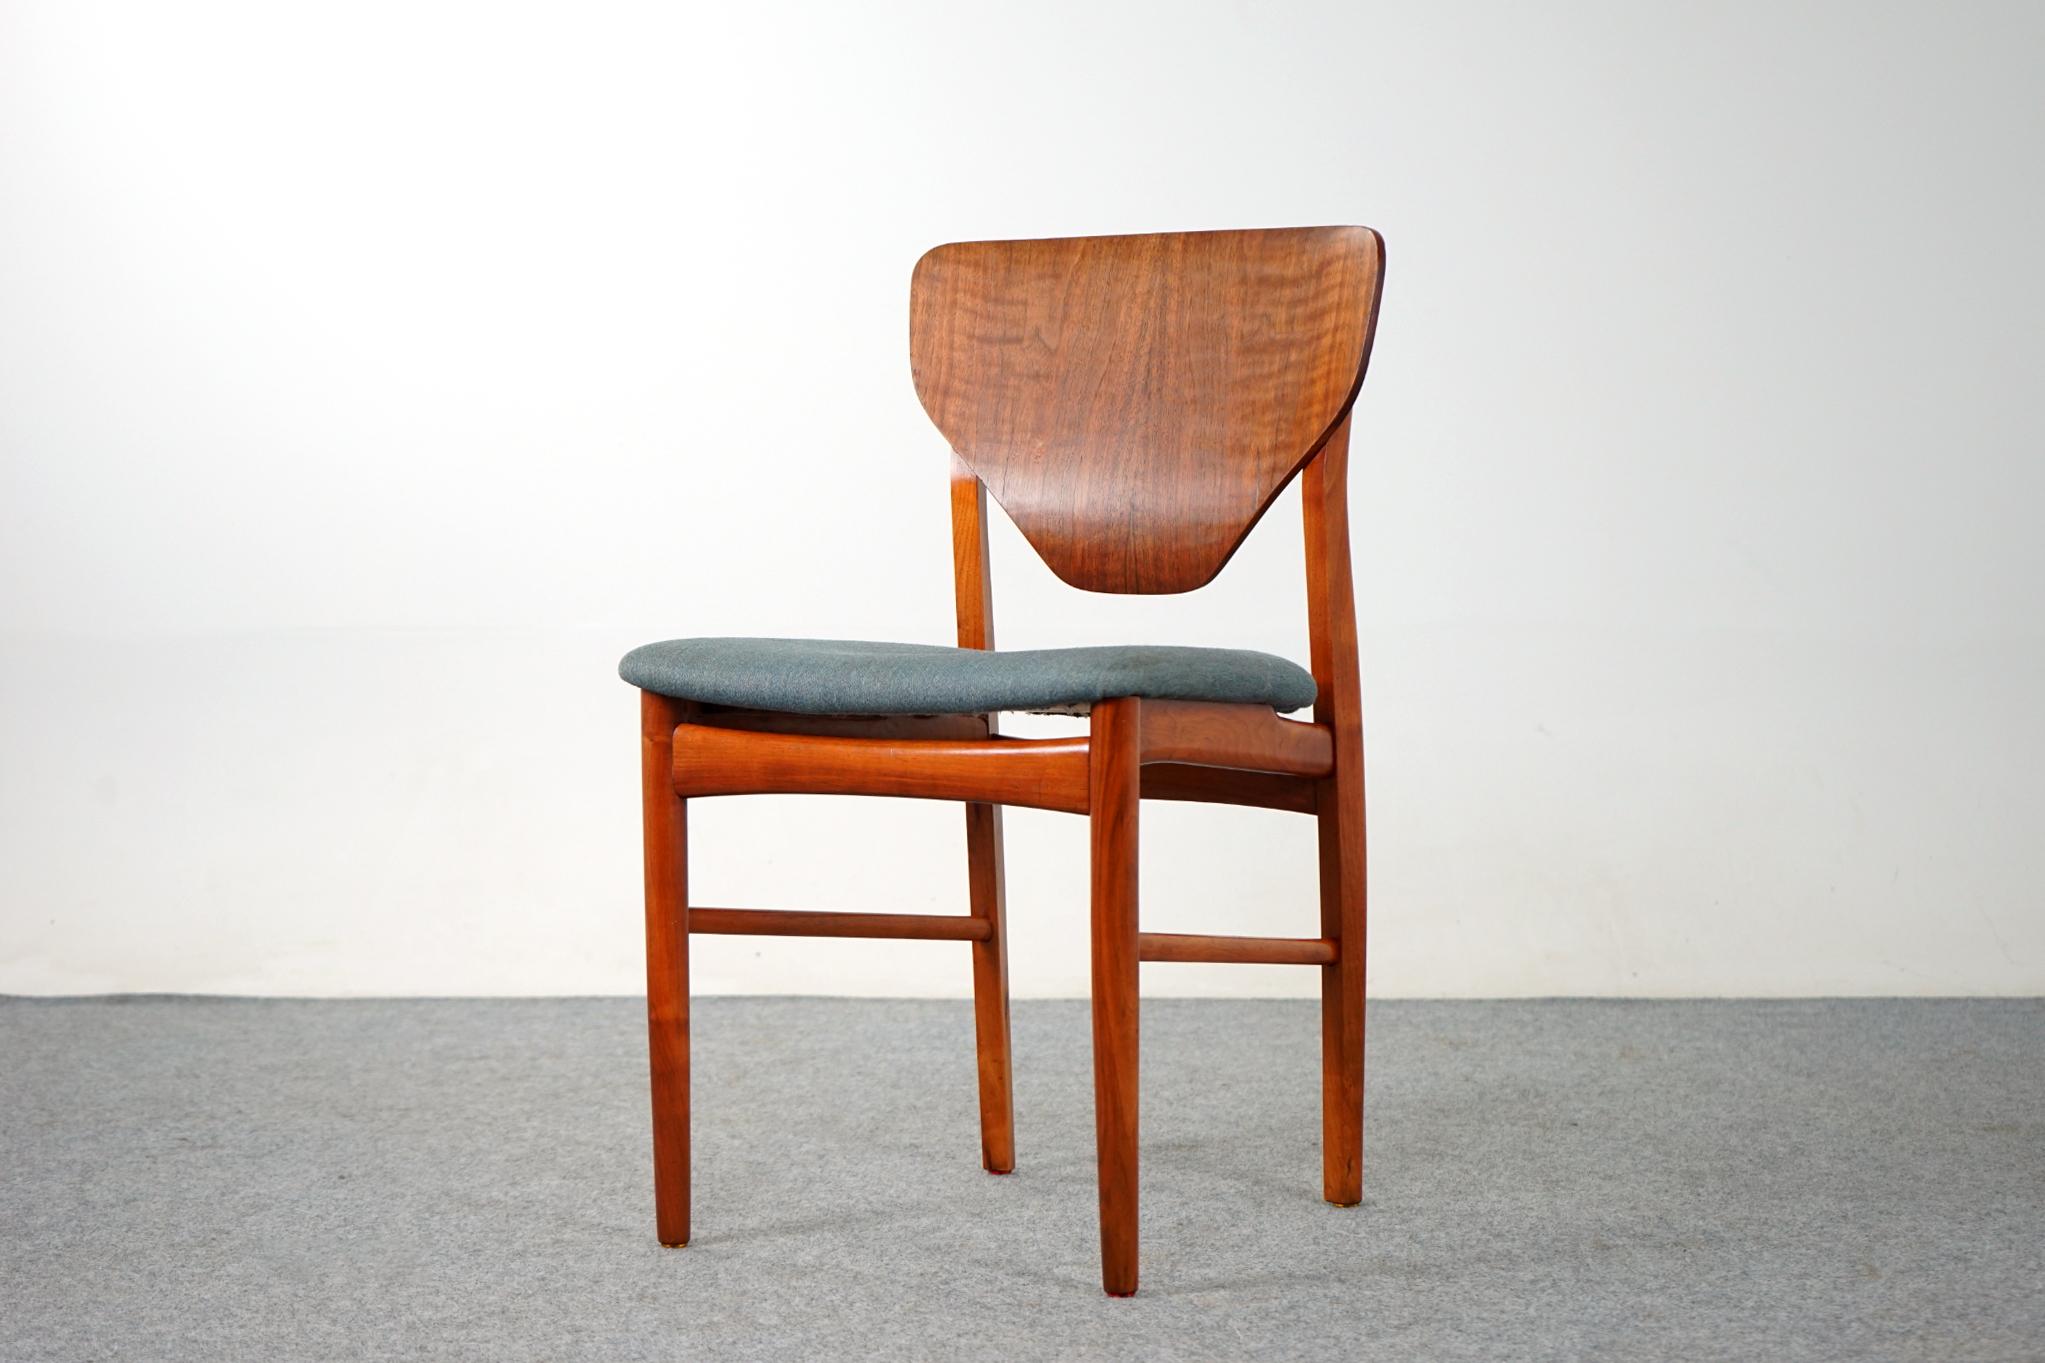 Walnut Danish dining chair, circa 1960's. Unique shield back design with integrated hidden hand pull on the back rest. Generous seat provided support and comfort, with some minor wear on the fabric. Solid wood legs feature bowtie cross braces for